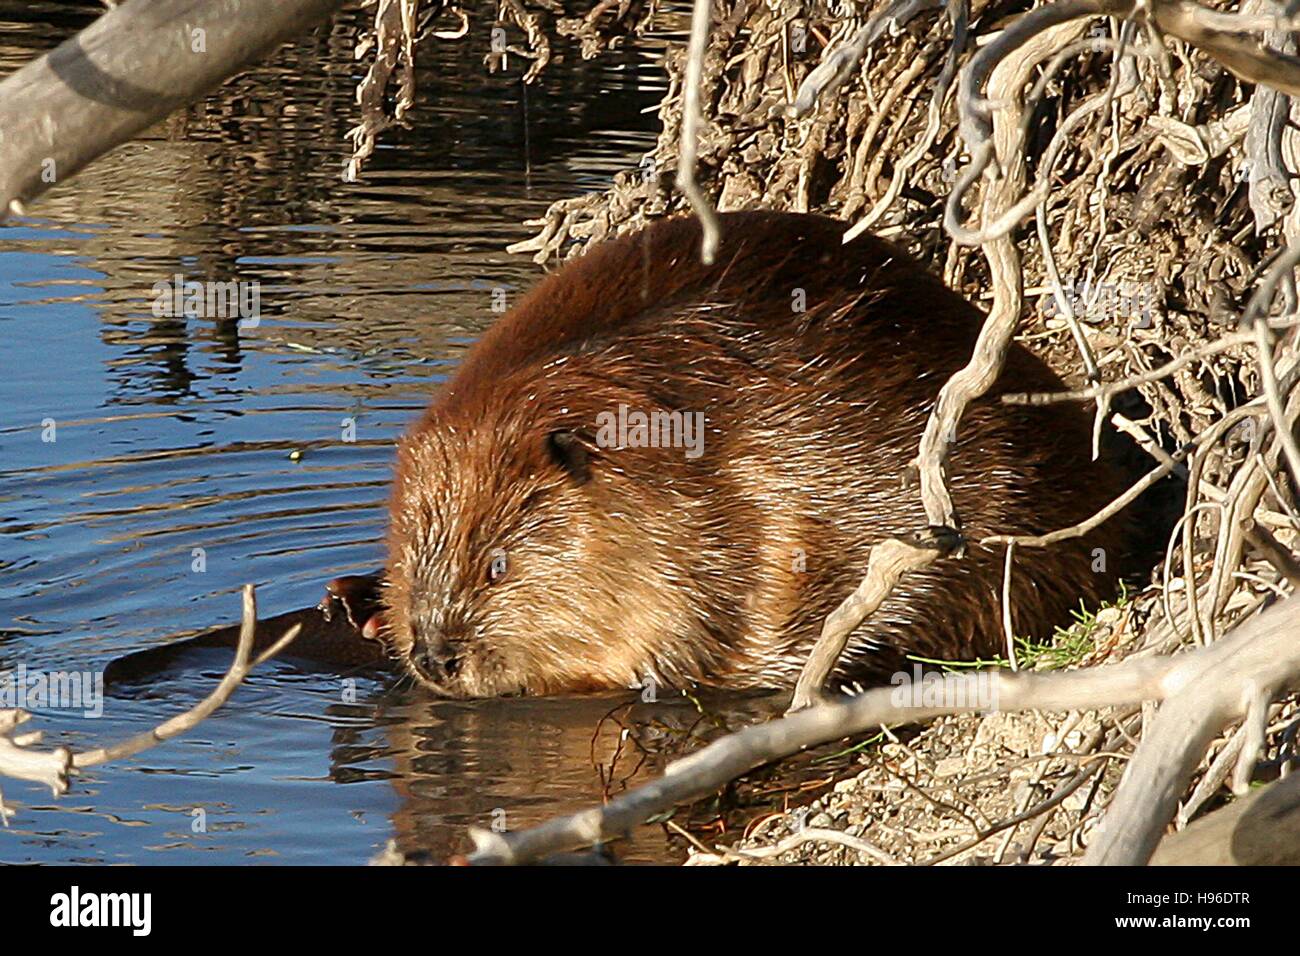 A beaver burrows near the shoreline of a creek in the Yellowstone National Park August 29, 2007 in Wyoming. Stock Photo